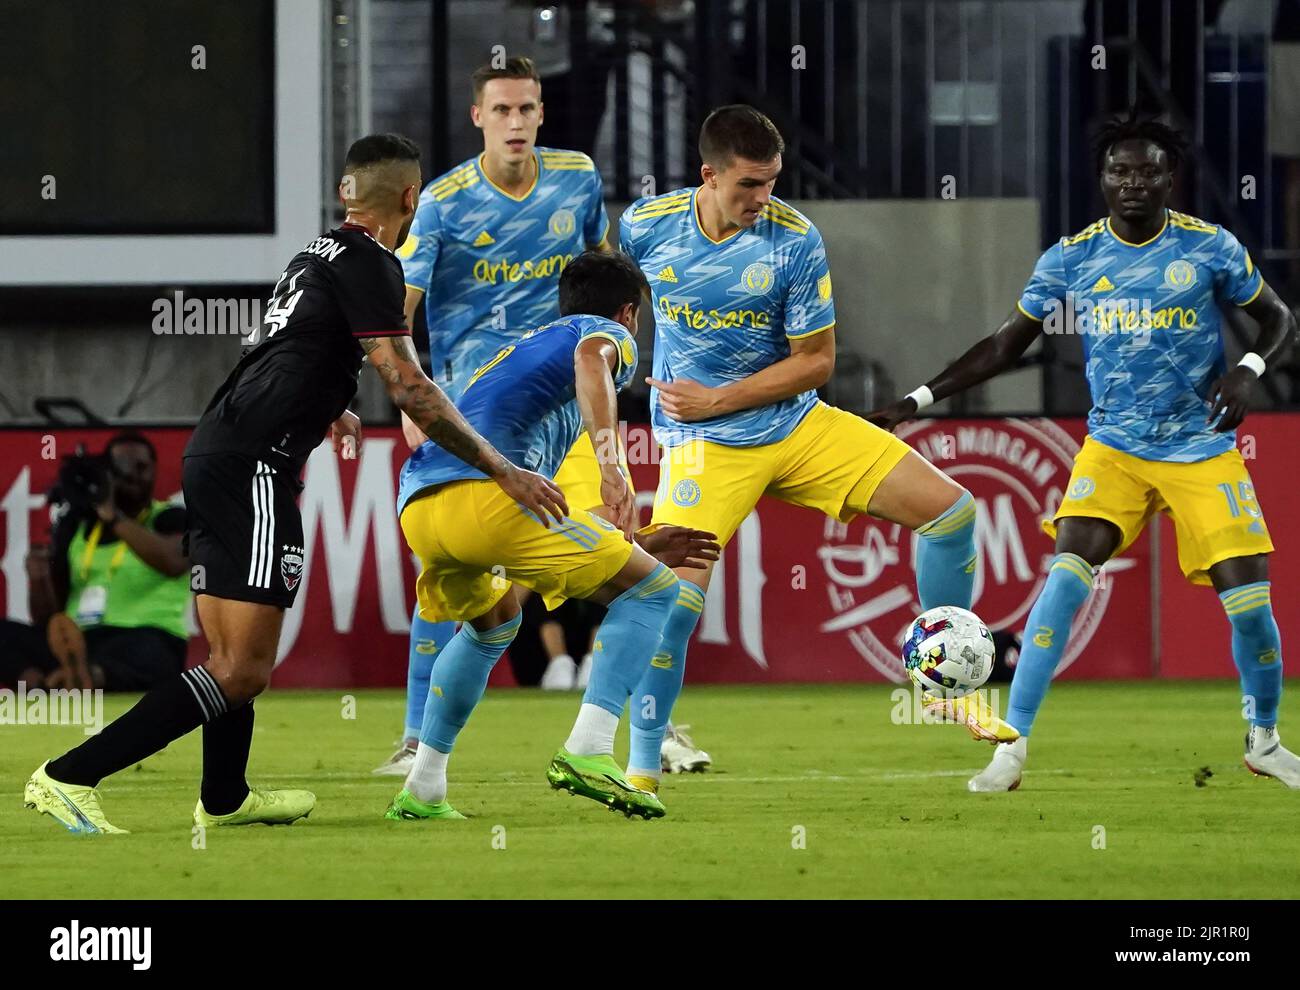 WASHINGTON, DC, USA - 20 AUGUST 2022: Philadelphia defense controls the ball from D.C. United midfielder Victor Palsson (44) during a MLS match between D.C United and the Philadelphia Union on August 20, 2022, at Audi Field, in Washington, DC. (Photo by Tony Quinn-Alamy Live News) Stock Photo